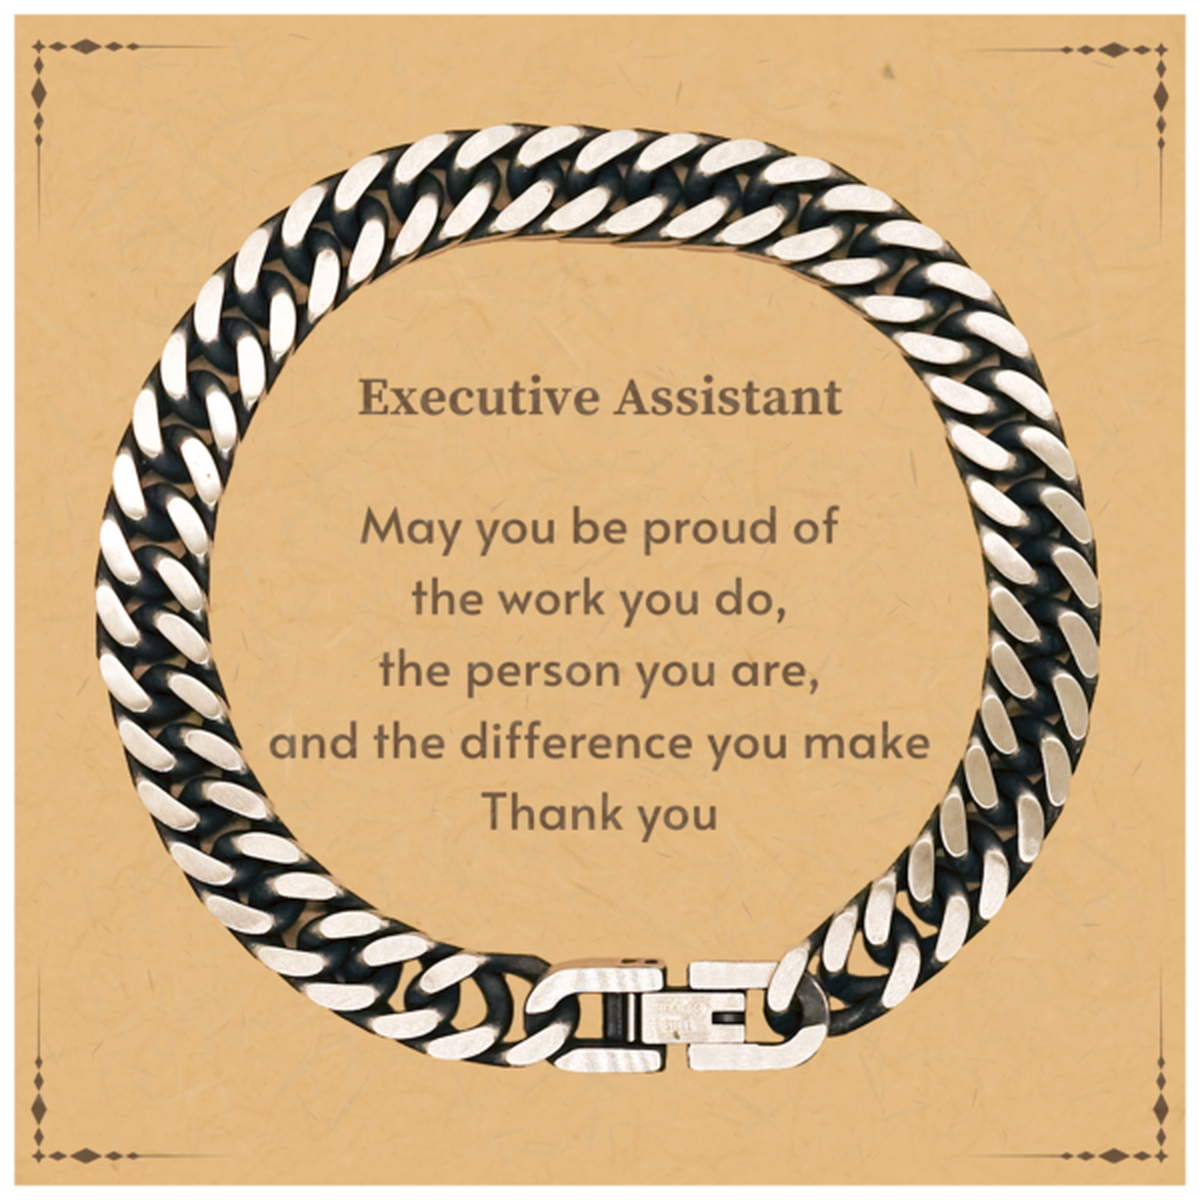 Heartwarming Cuban Link Chain Bracelet Retirement Coworkers Gifts for Executive Assistant, Executive Assistant May You be proud of the work you do, the person you are Gifts for Boss Men Women Friends